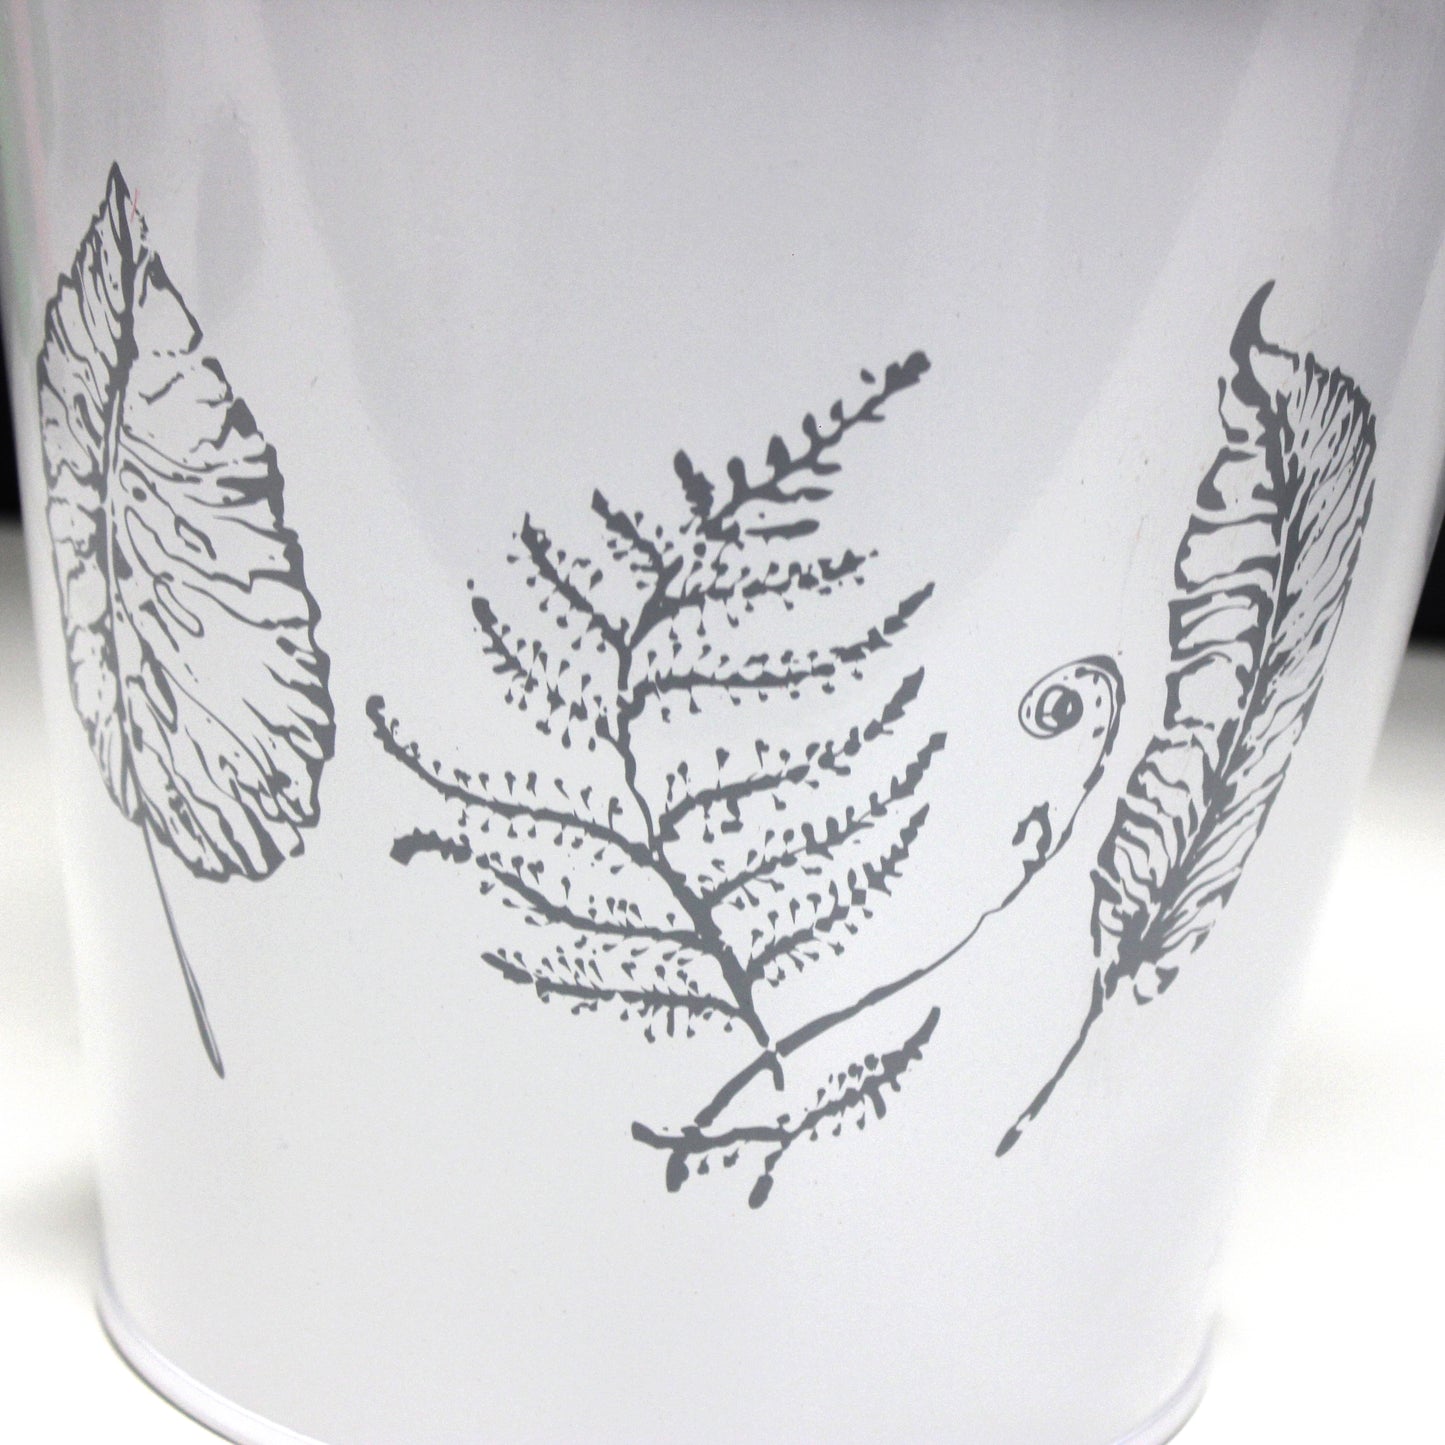 Garden Plant Pots and Planters with Leaf Prints, 7 Litres - 3 Colours Available